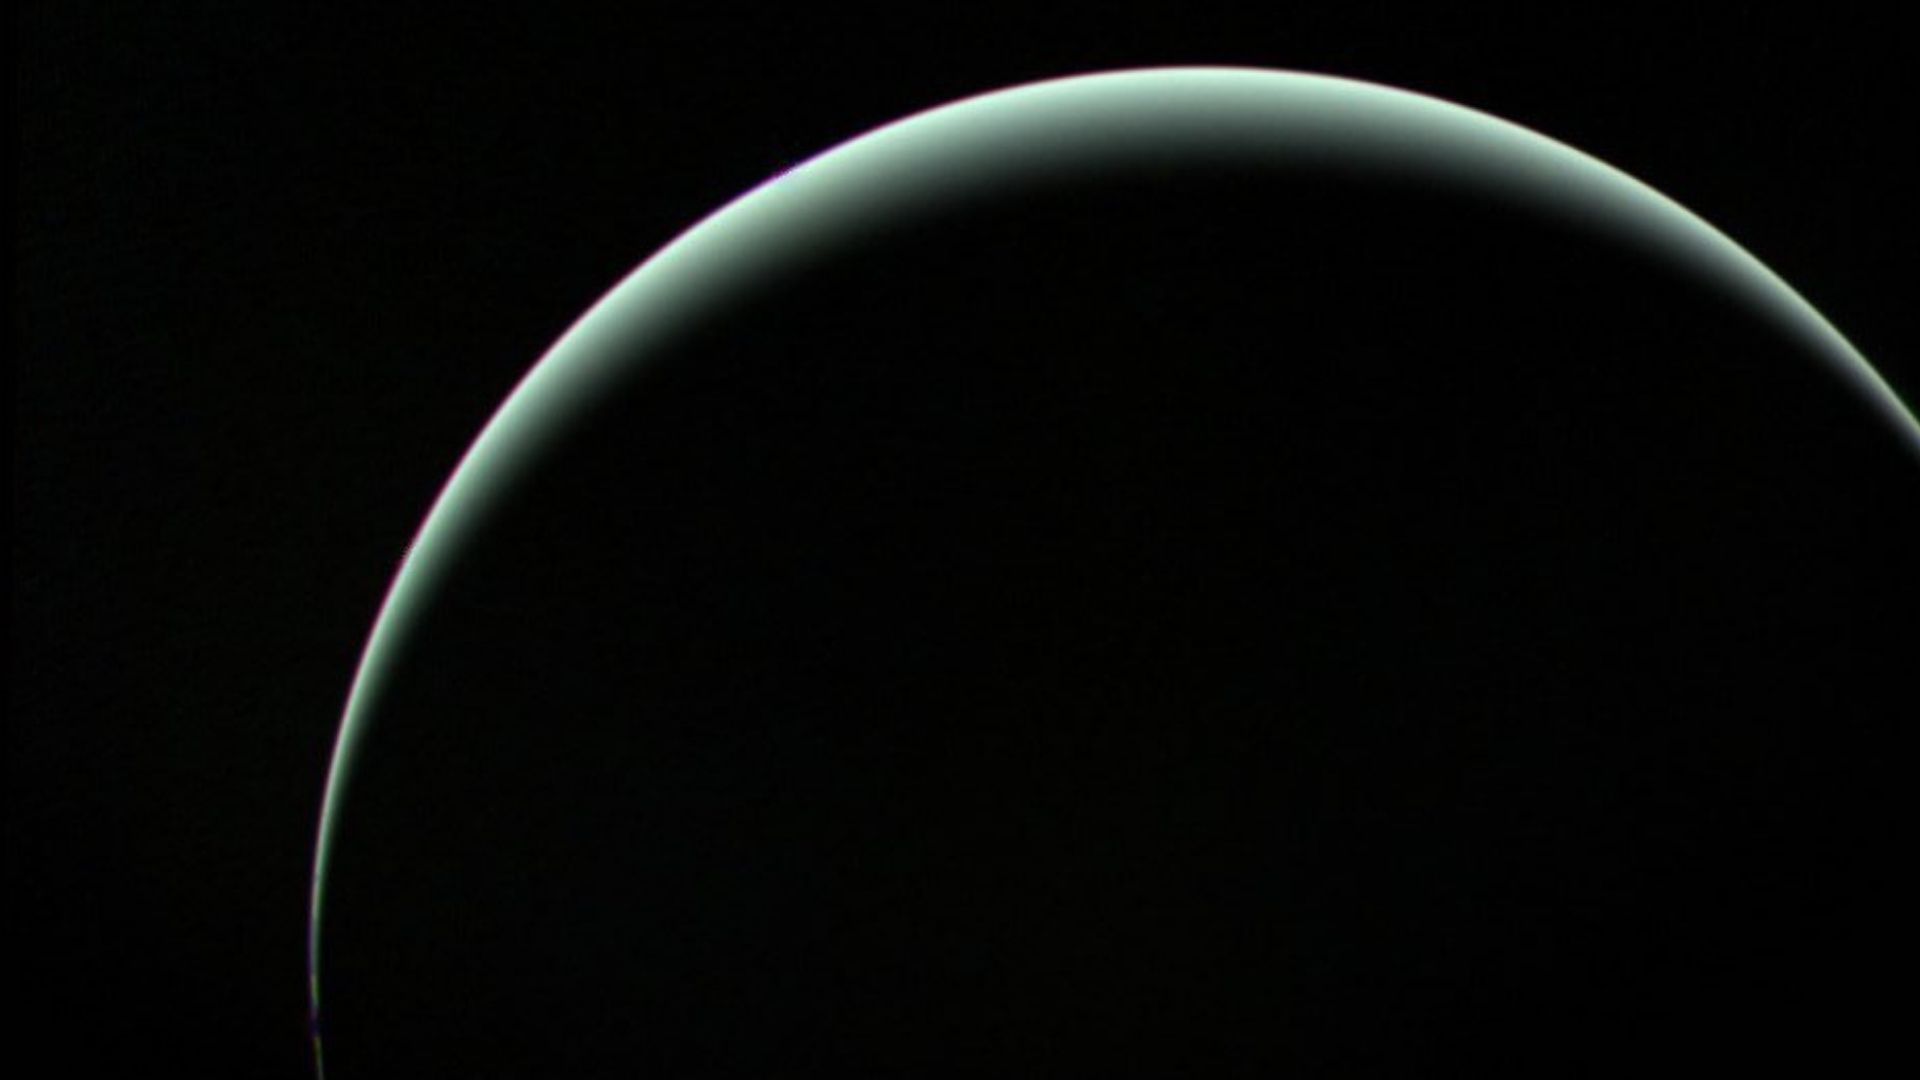 Voyager 2 took this image on January 25, 1986 as it departed from Uranus to Neptune.